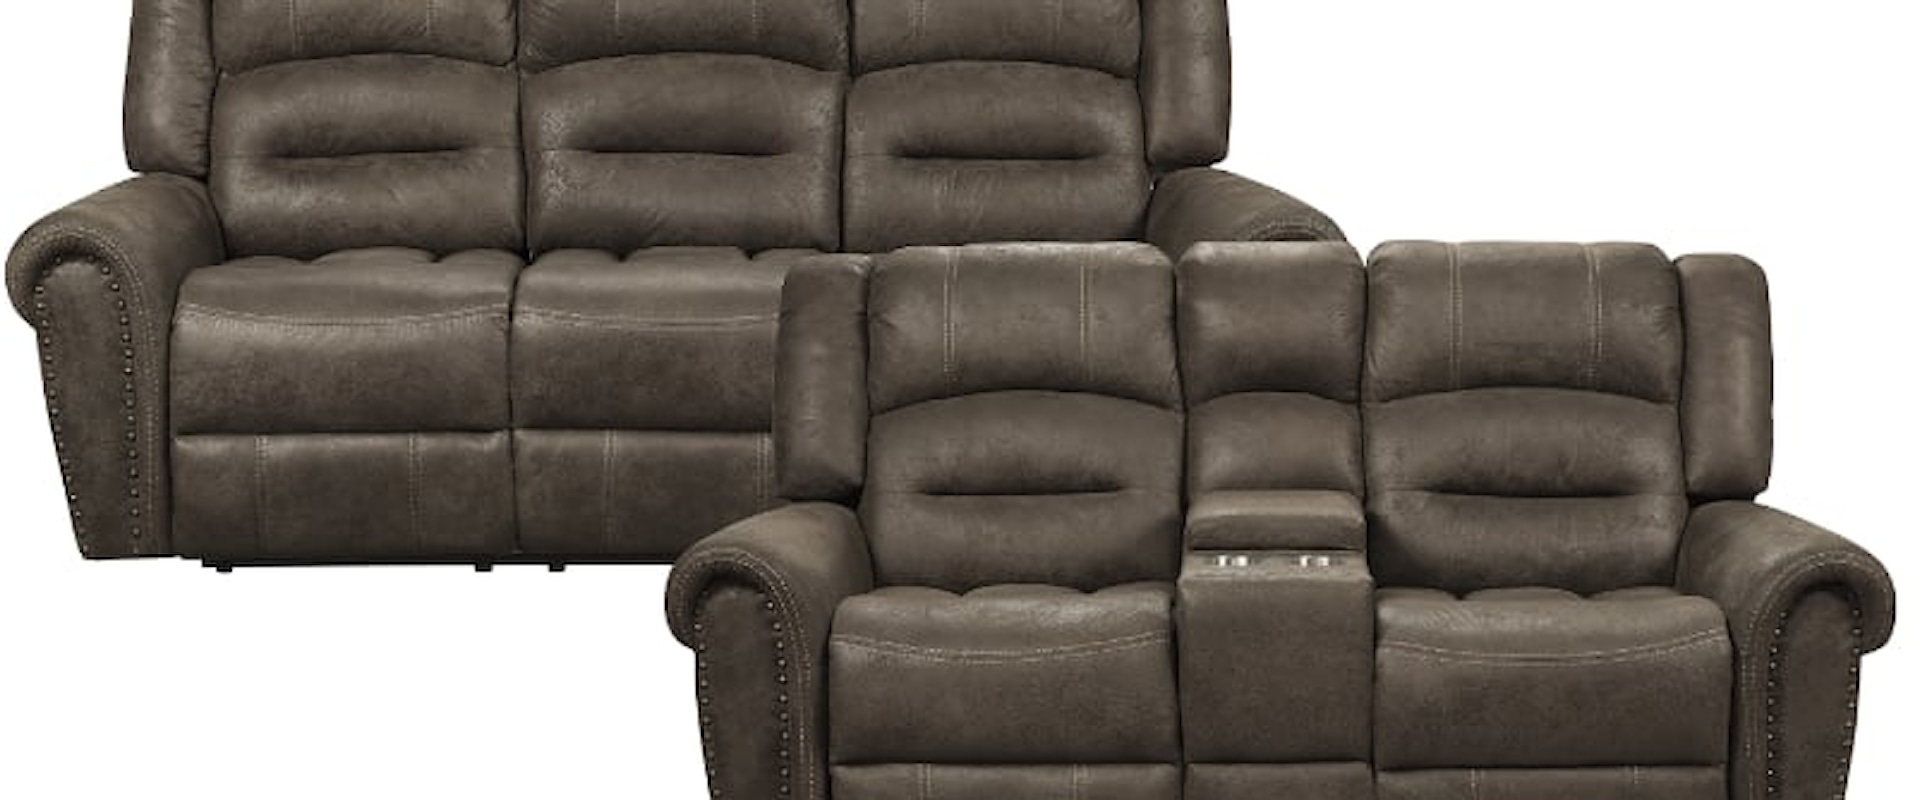 Transitional 2-Piece Reclining Living Room Set with Nailhead Trimming